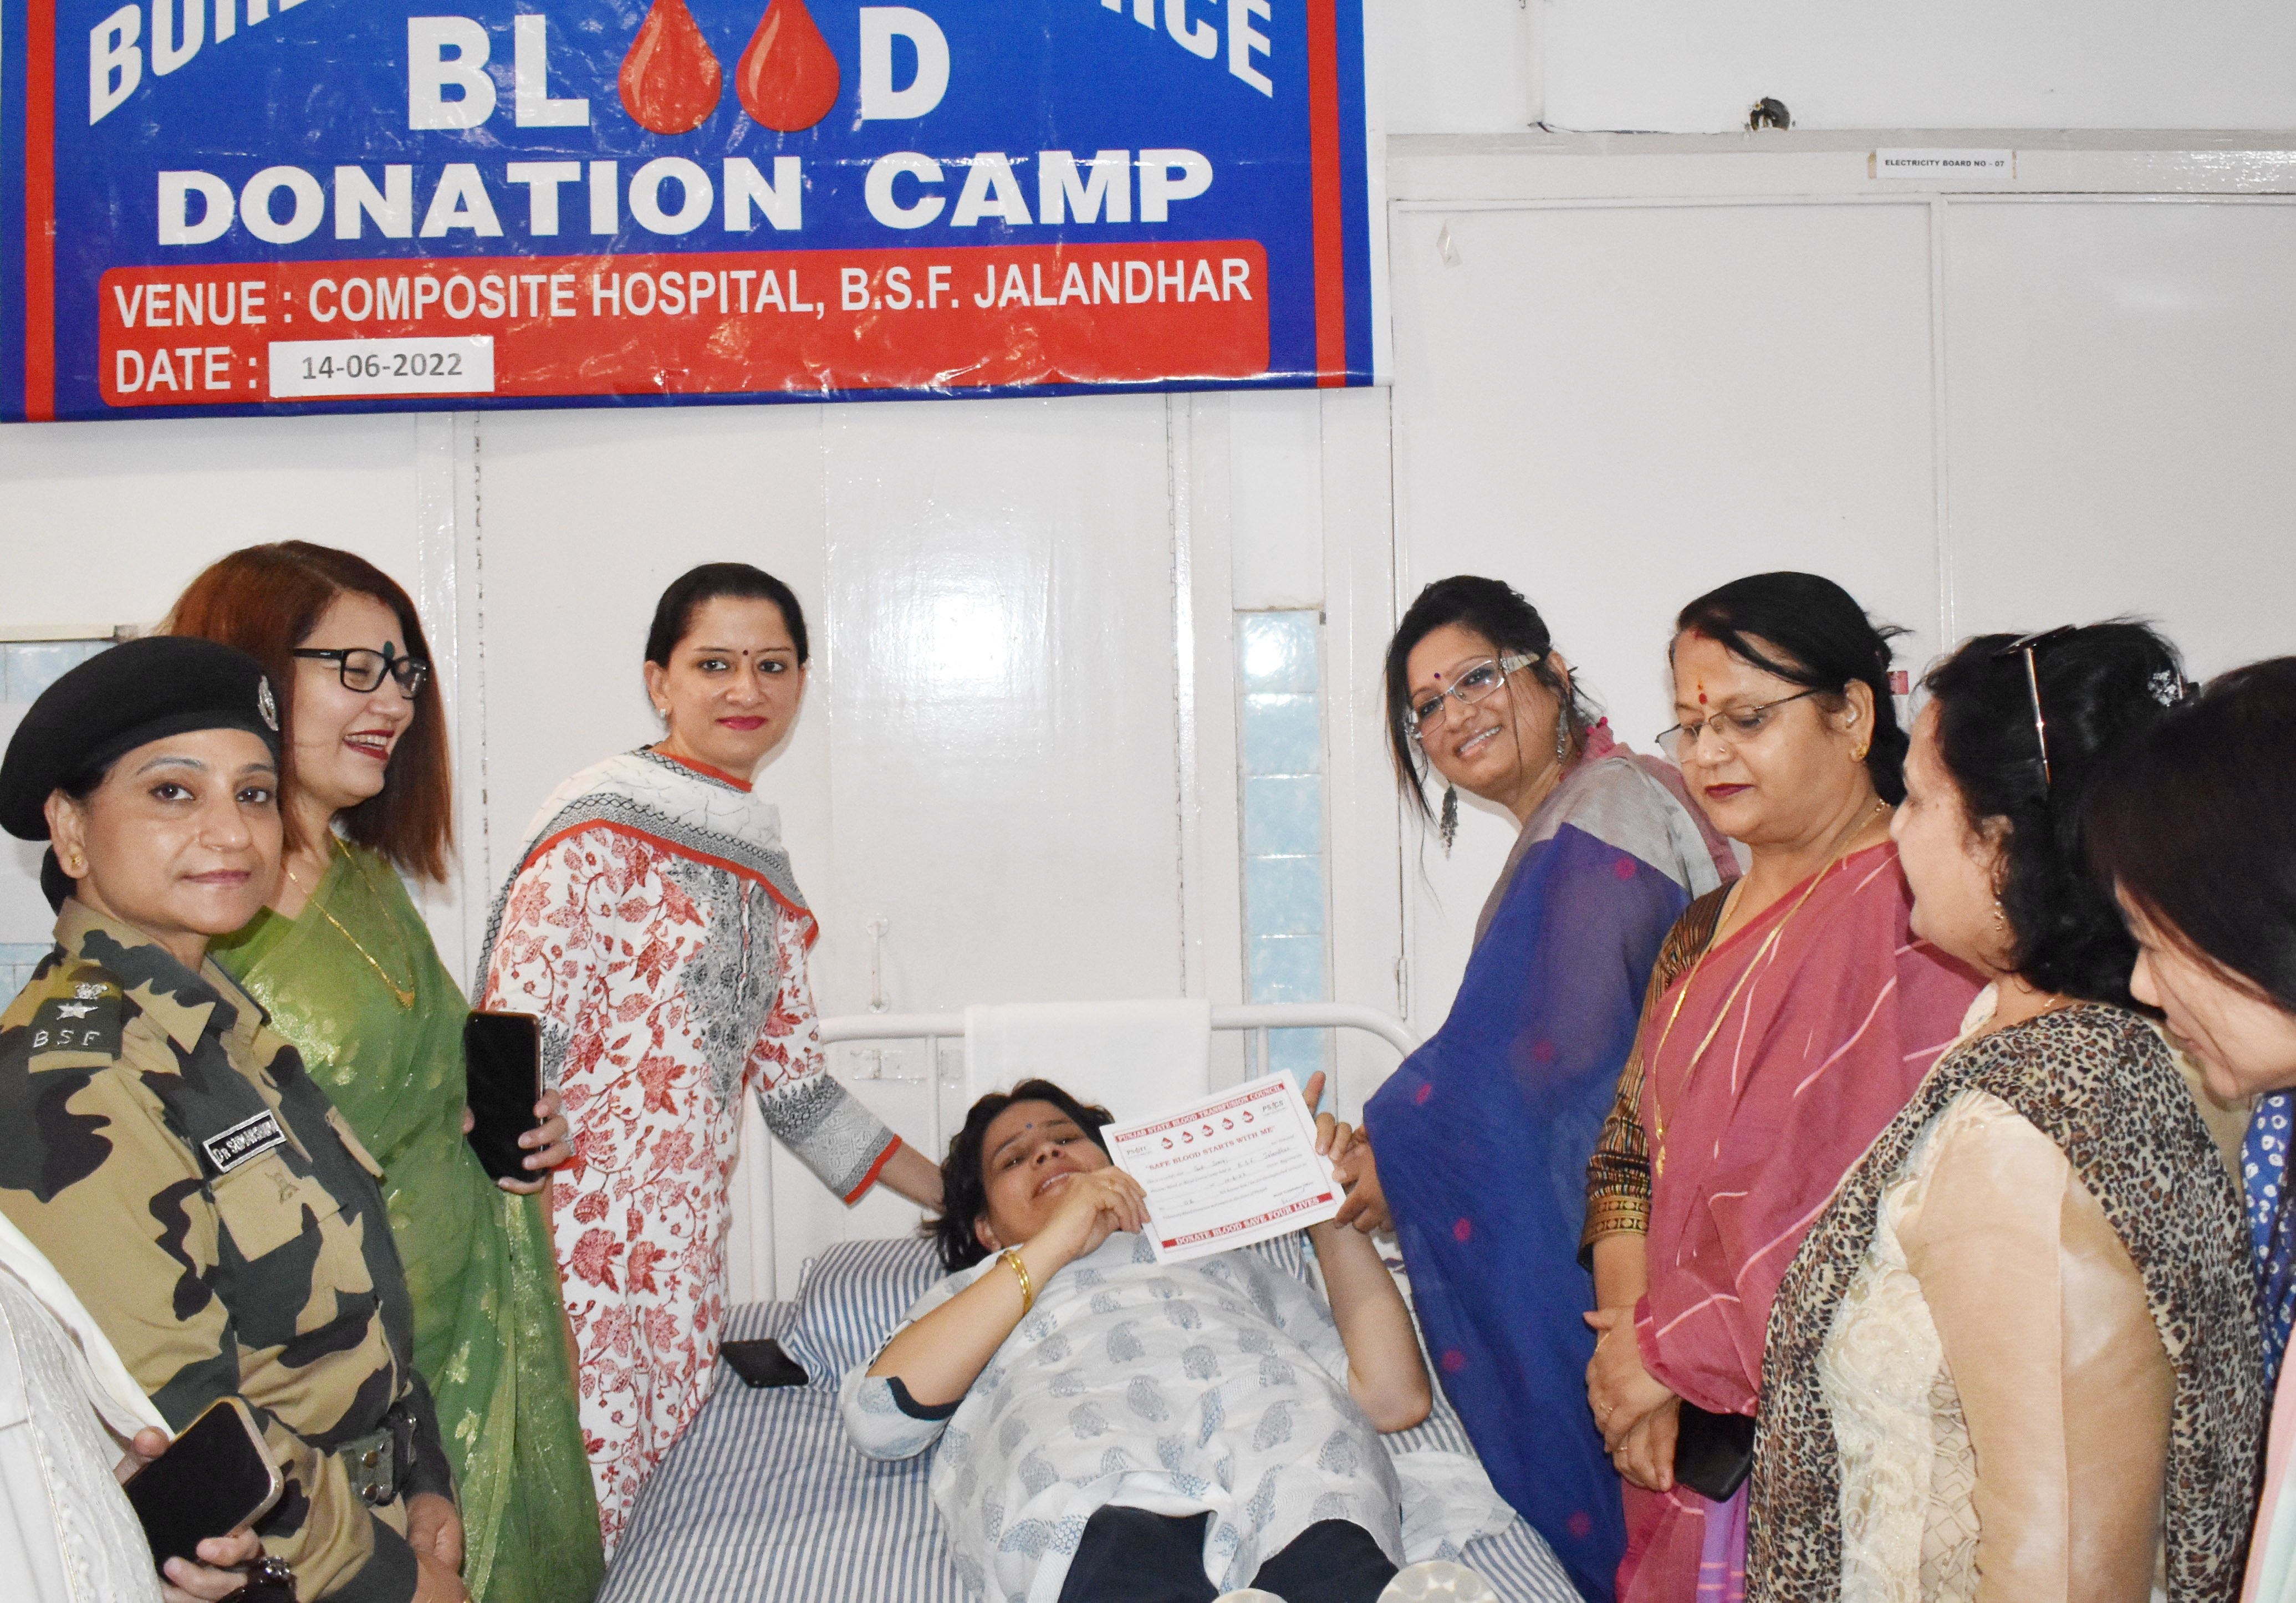 35 BSF personnel donate blood